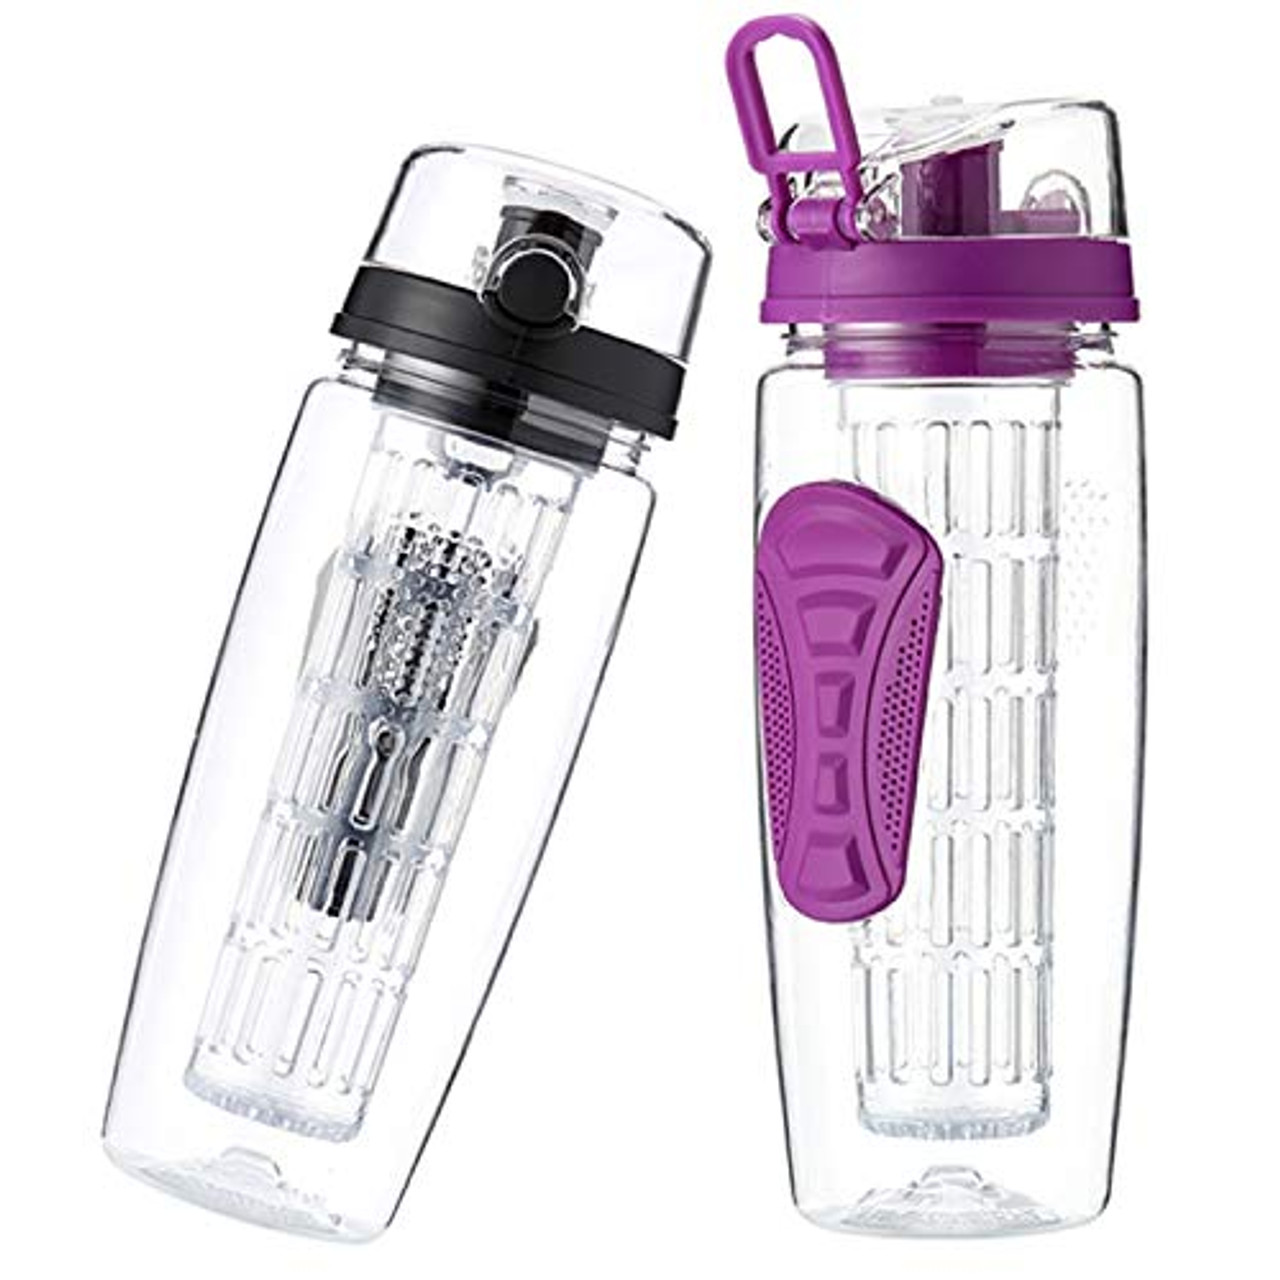 32 oz Glass Water Bottles With Times To Drink and Straw Lid - 1 Liter Glass  Drinking Bottle with Straw, Waterbottle (Ribbed Black)